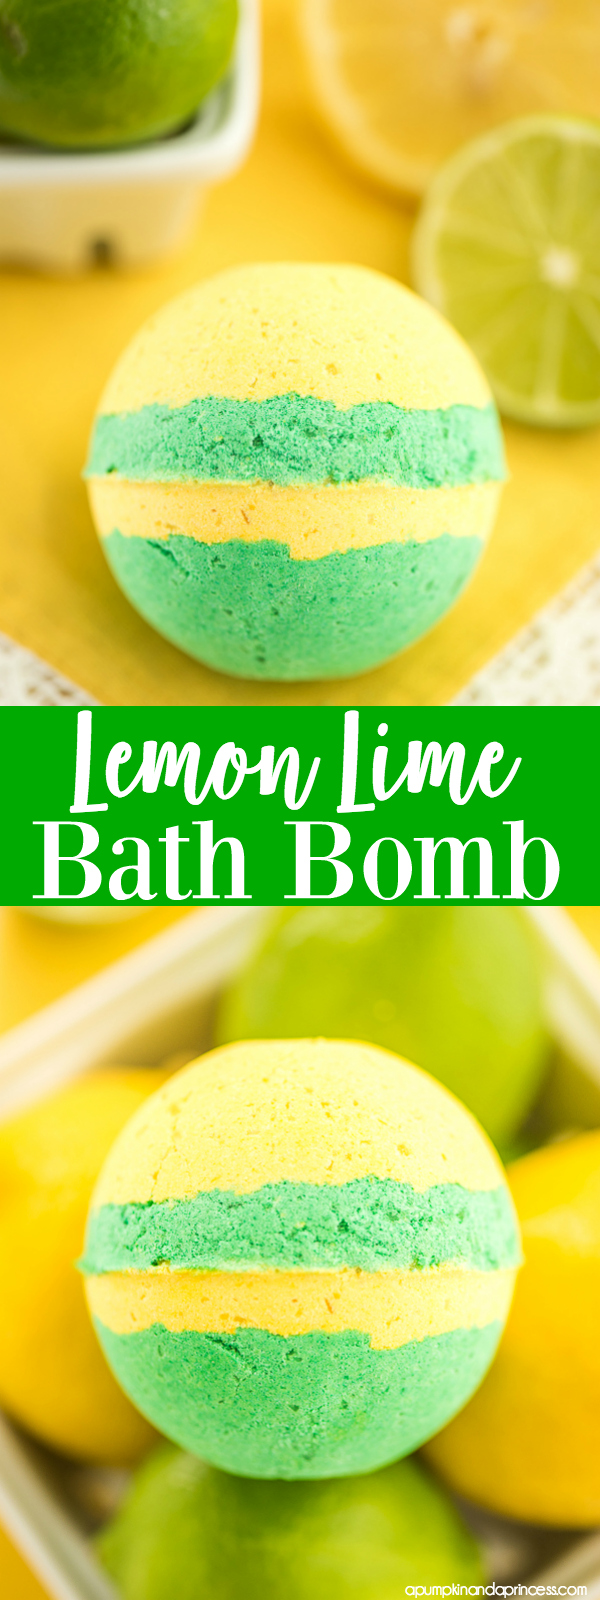 How to make lemon lime bath bombs – create the perfect citrus scented bath bomb for summer with layers of lemon and lime essential oils.